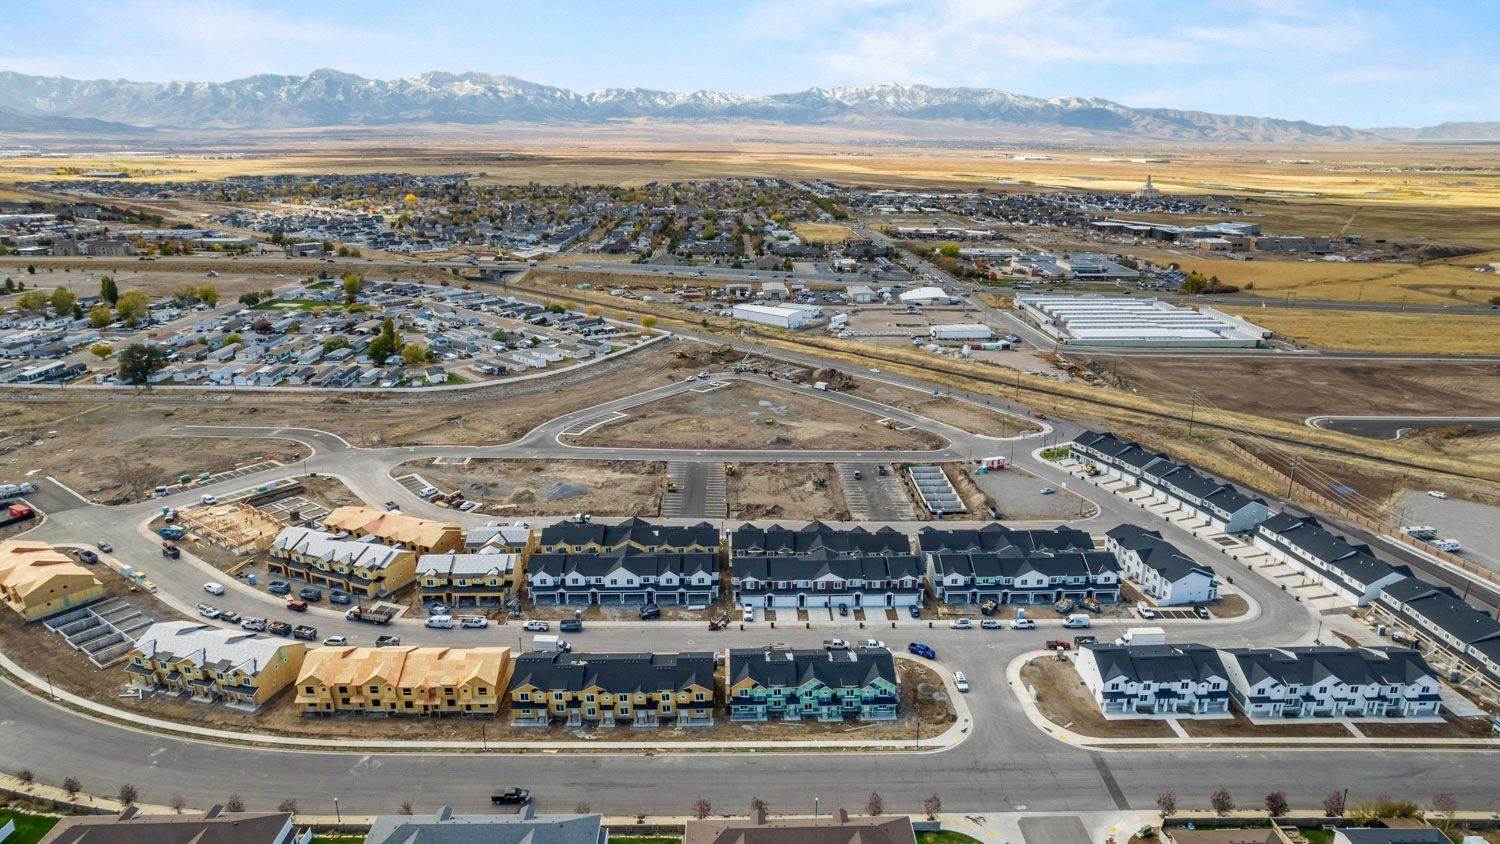 11. Western Acres xây dựng tại 259 East Serenity Avenue, Tooele, UT 84074